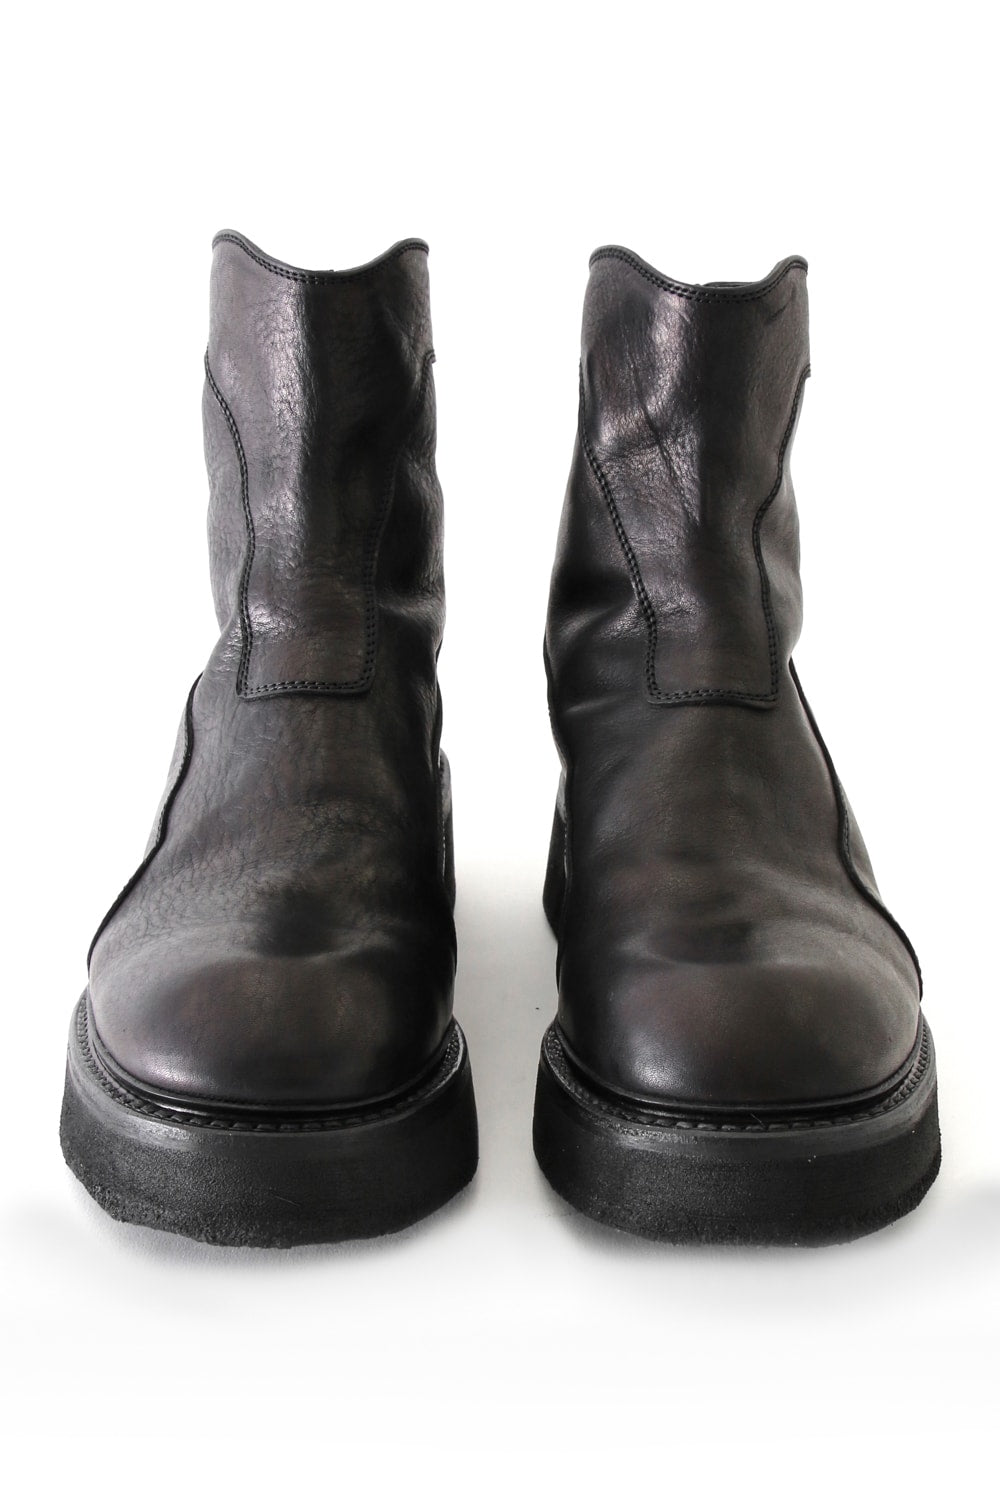 JULIUS - Boots - Online Store - FASCINATE THE R OSAKA / KYOTO